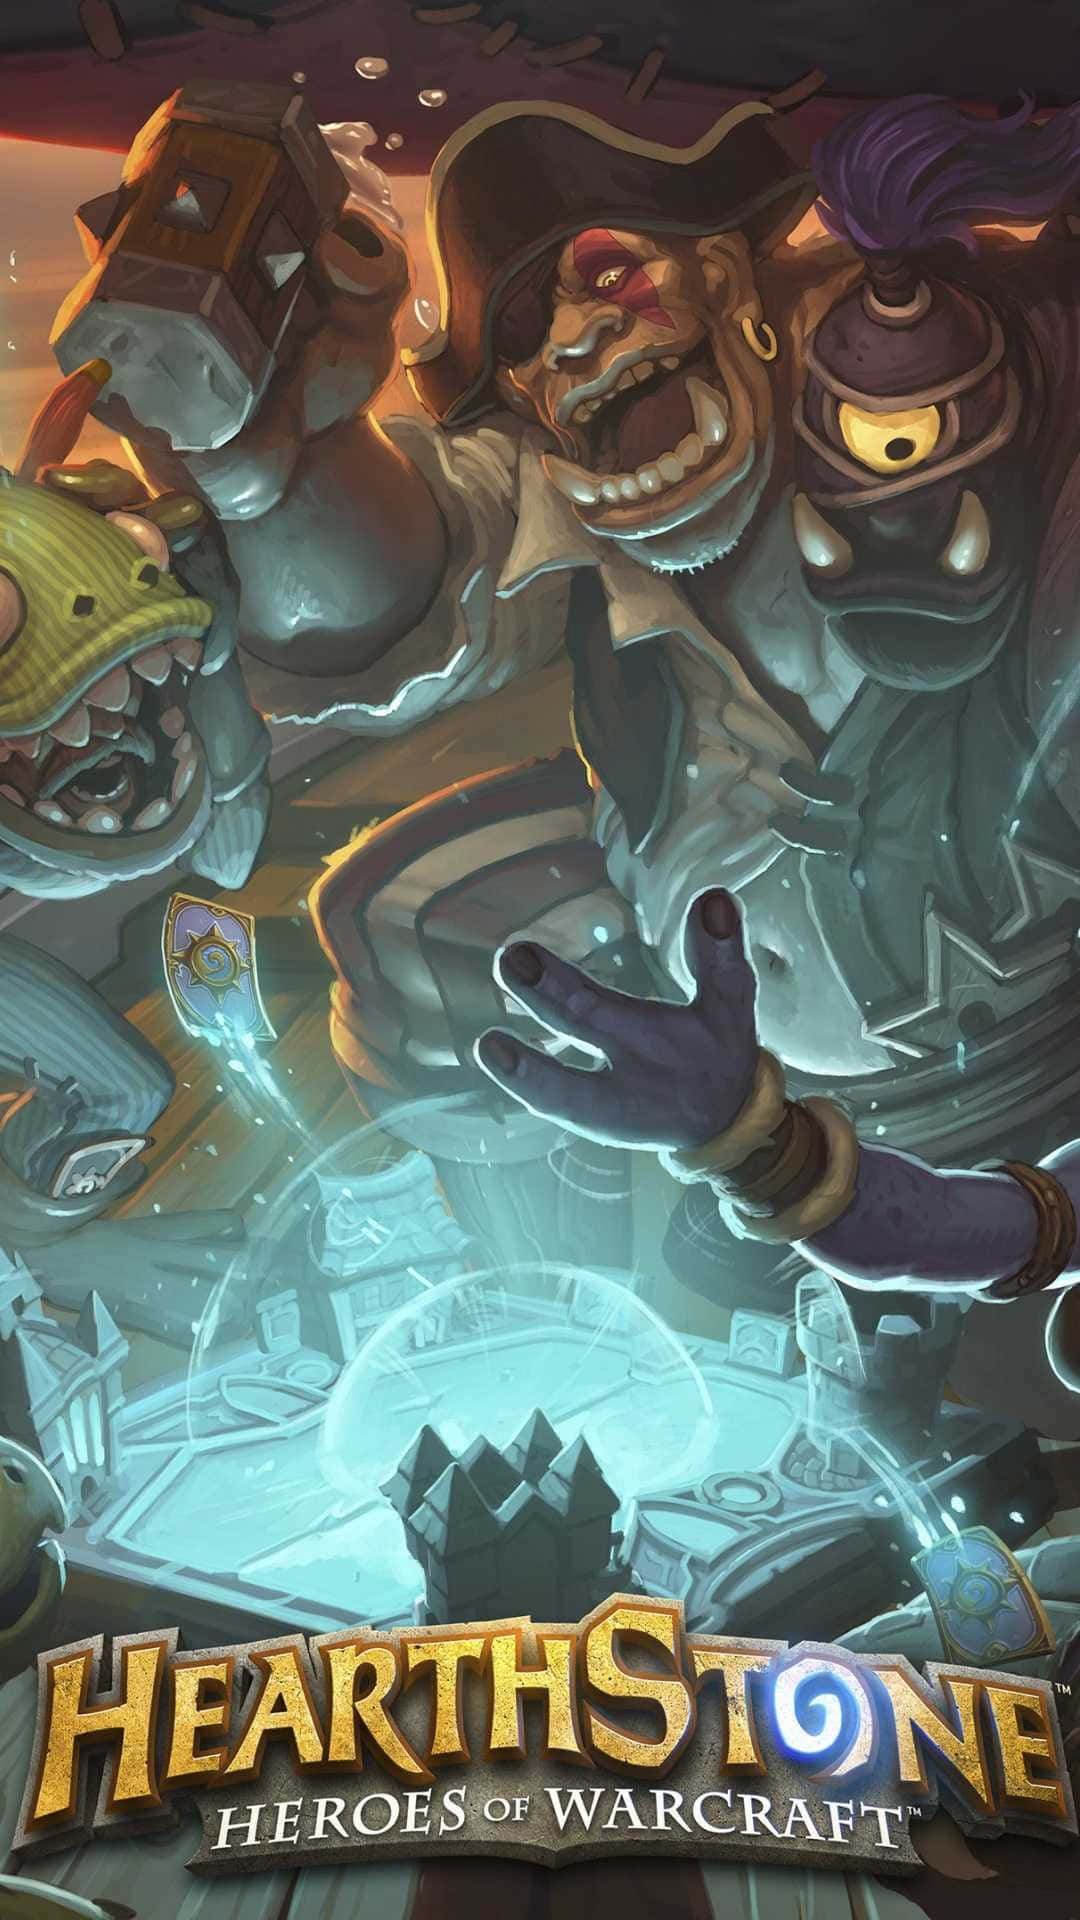 Papelde Parede Do Android Hearthstone Heroes Of Warcraft Em Pôster De Fundo.